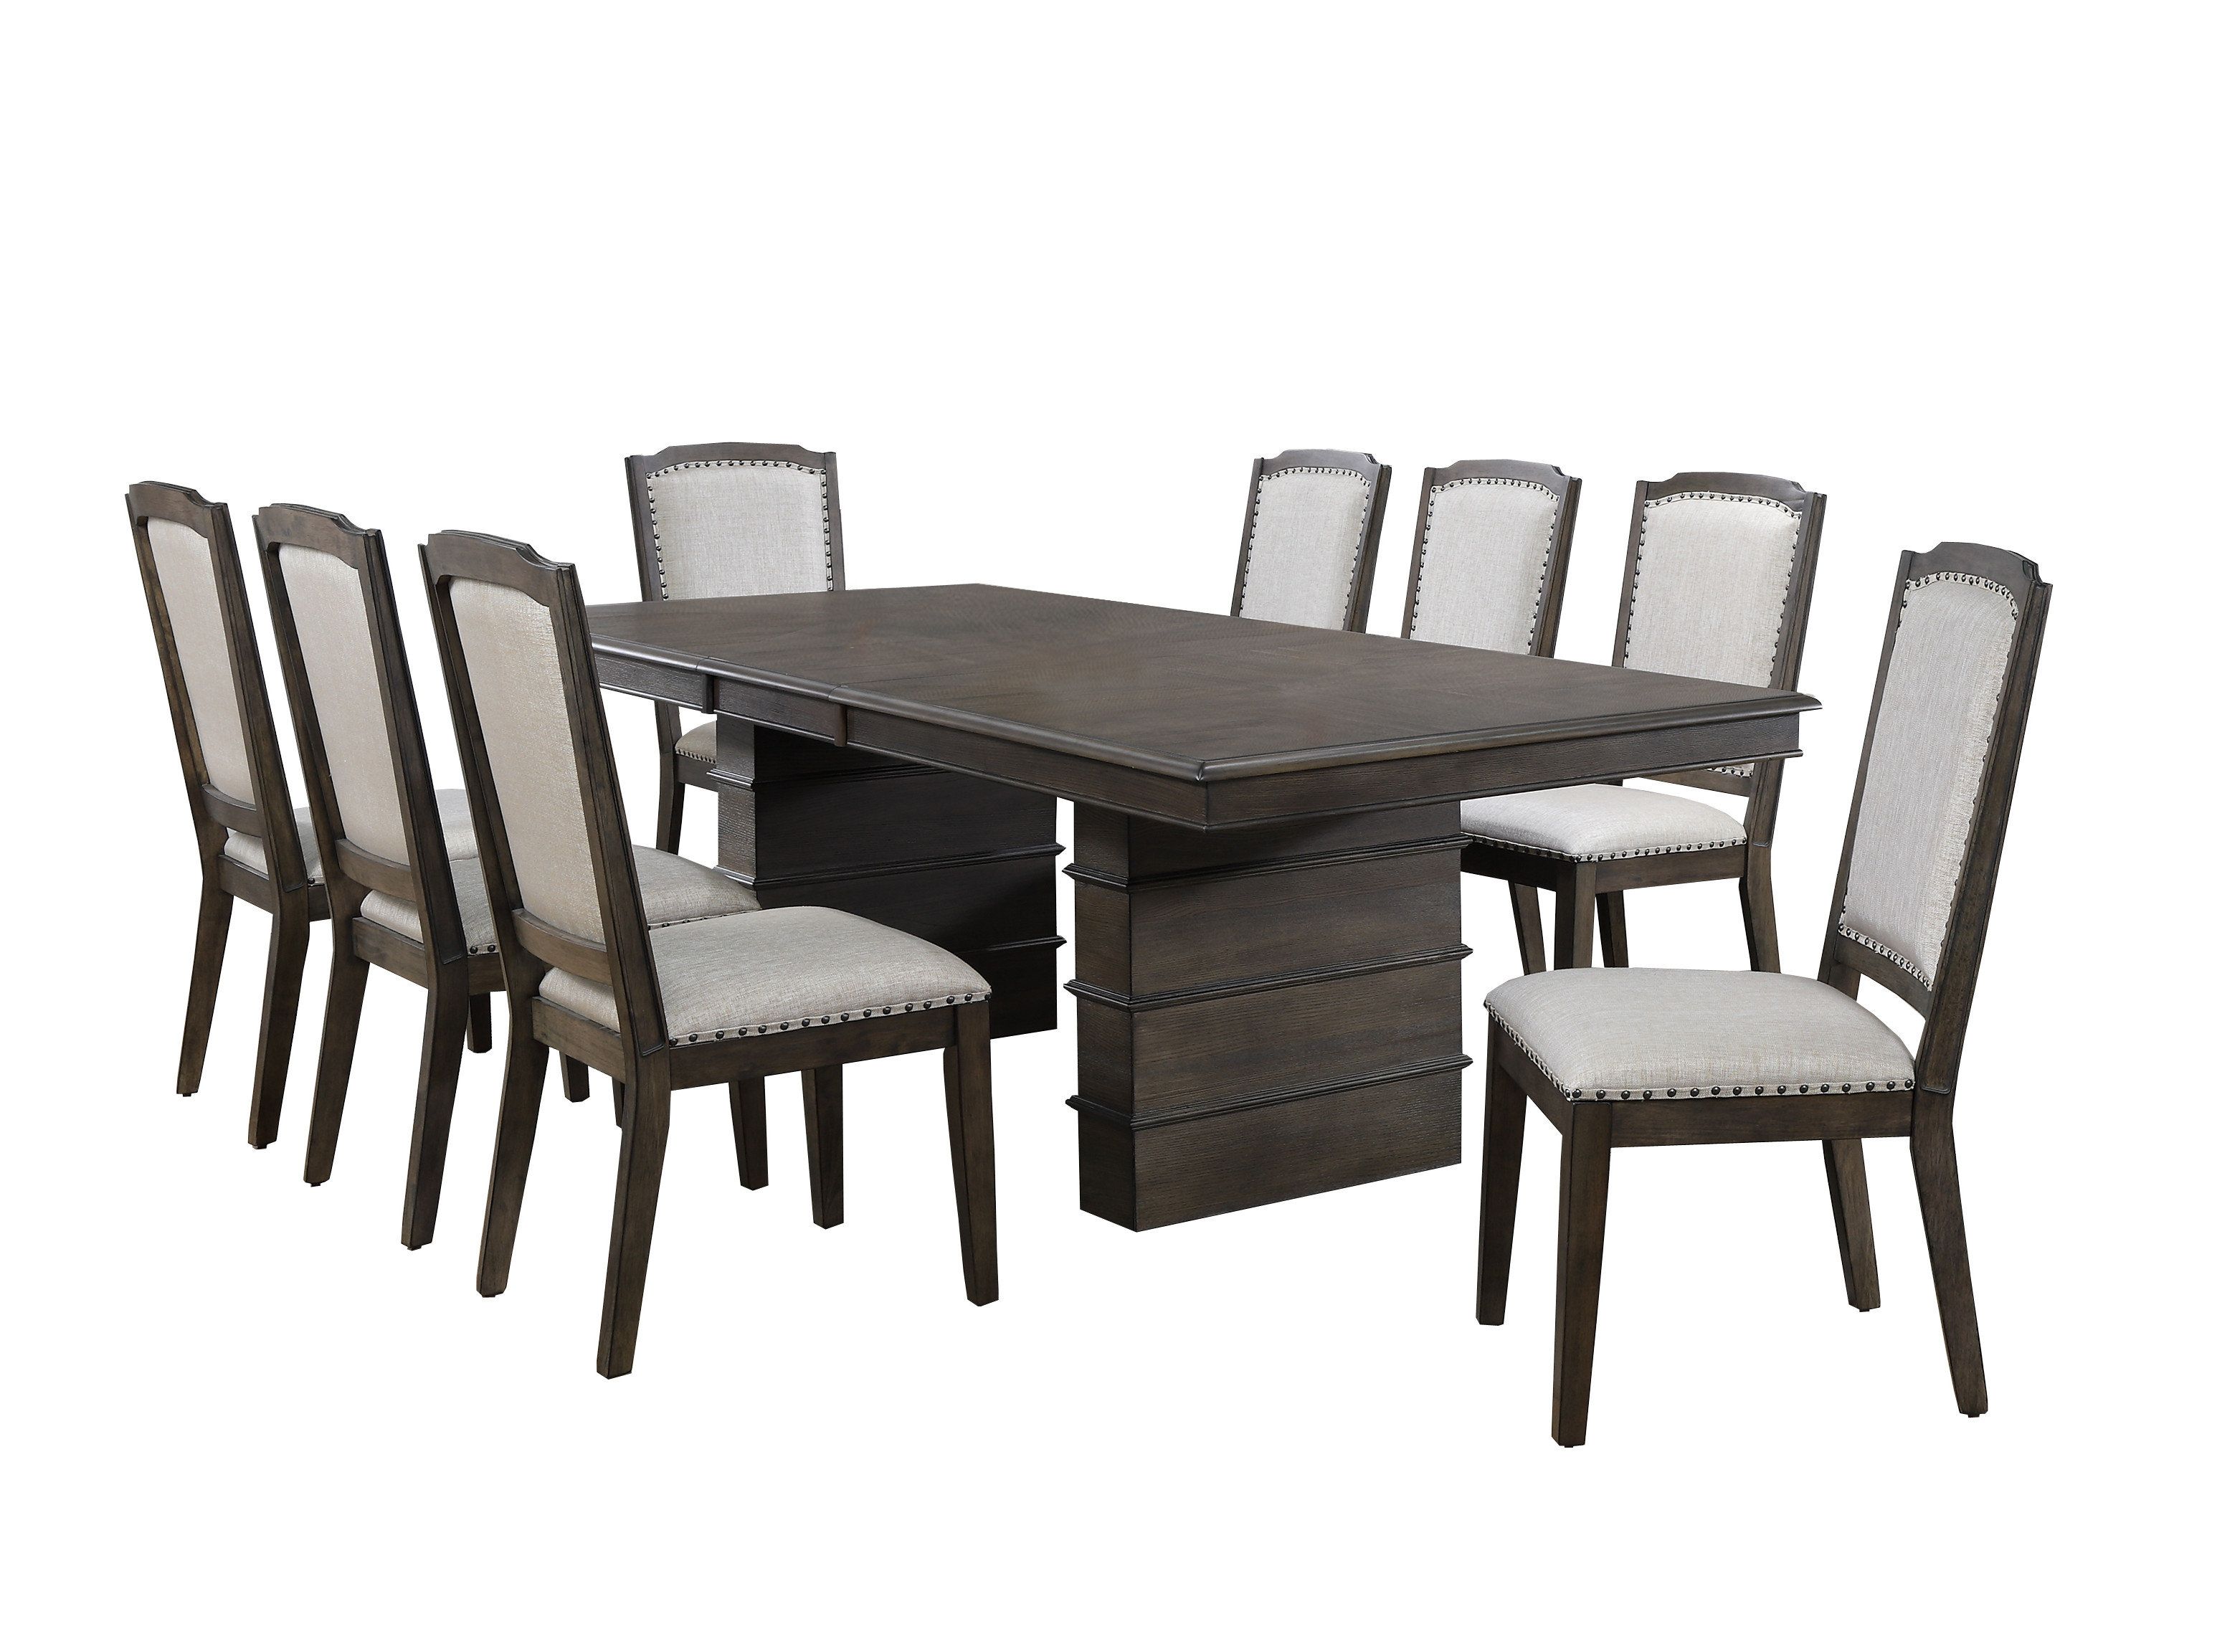 Yedinak 5 Piece Solid Wood Dining Sets In Latest Gracie Oaks Seaver 9 Piece Extendable Dining Set (View 14 of 20)